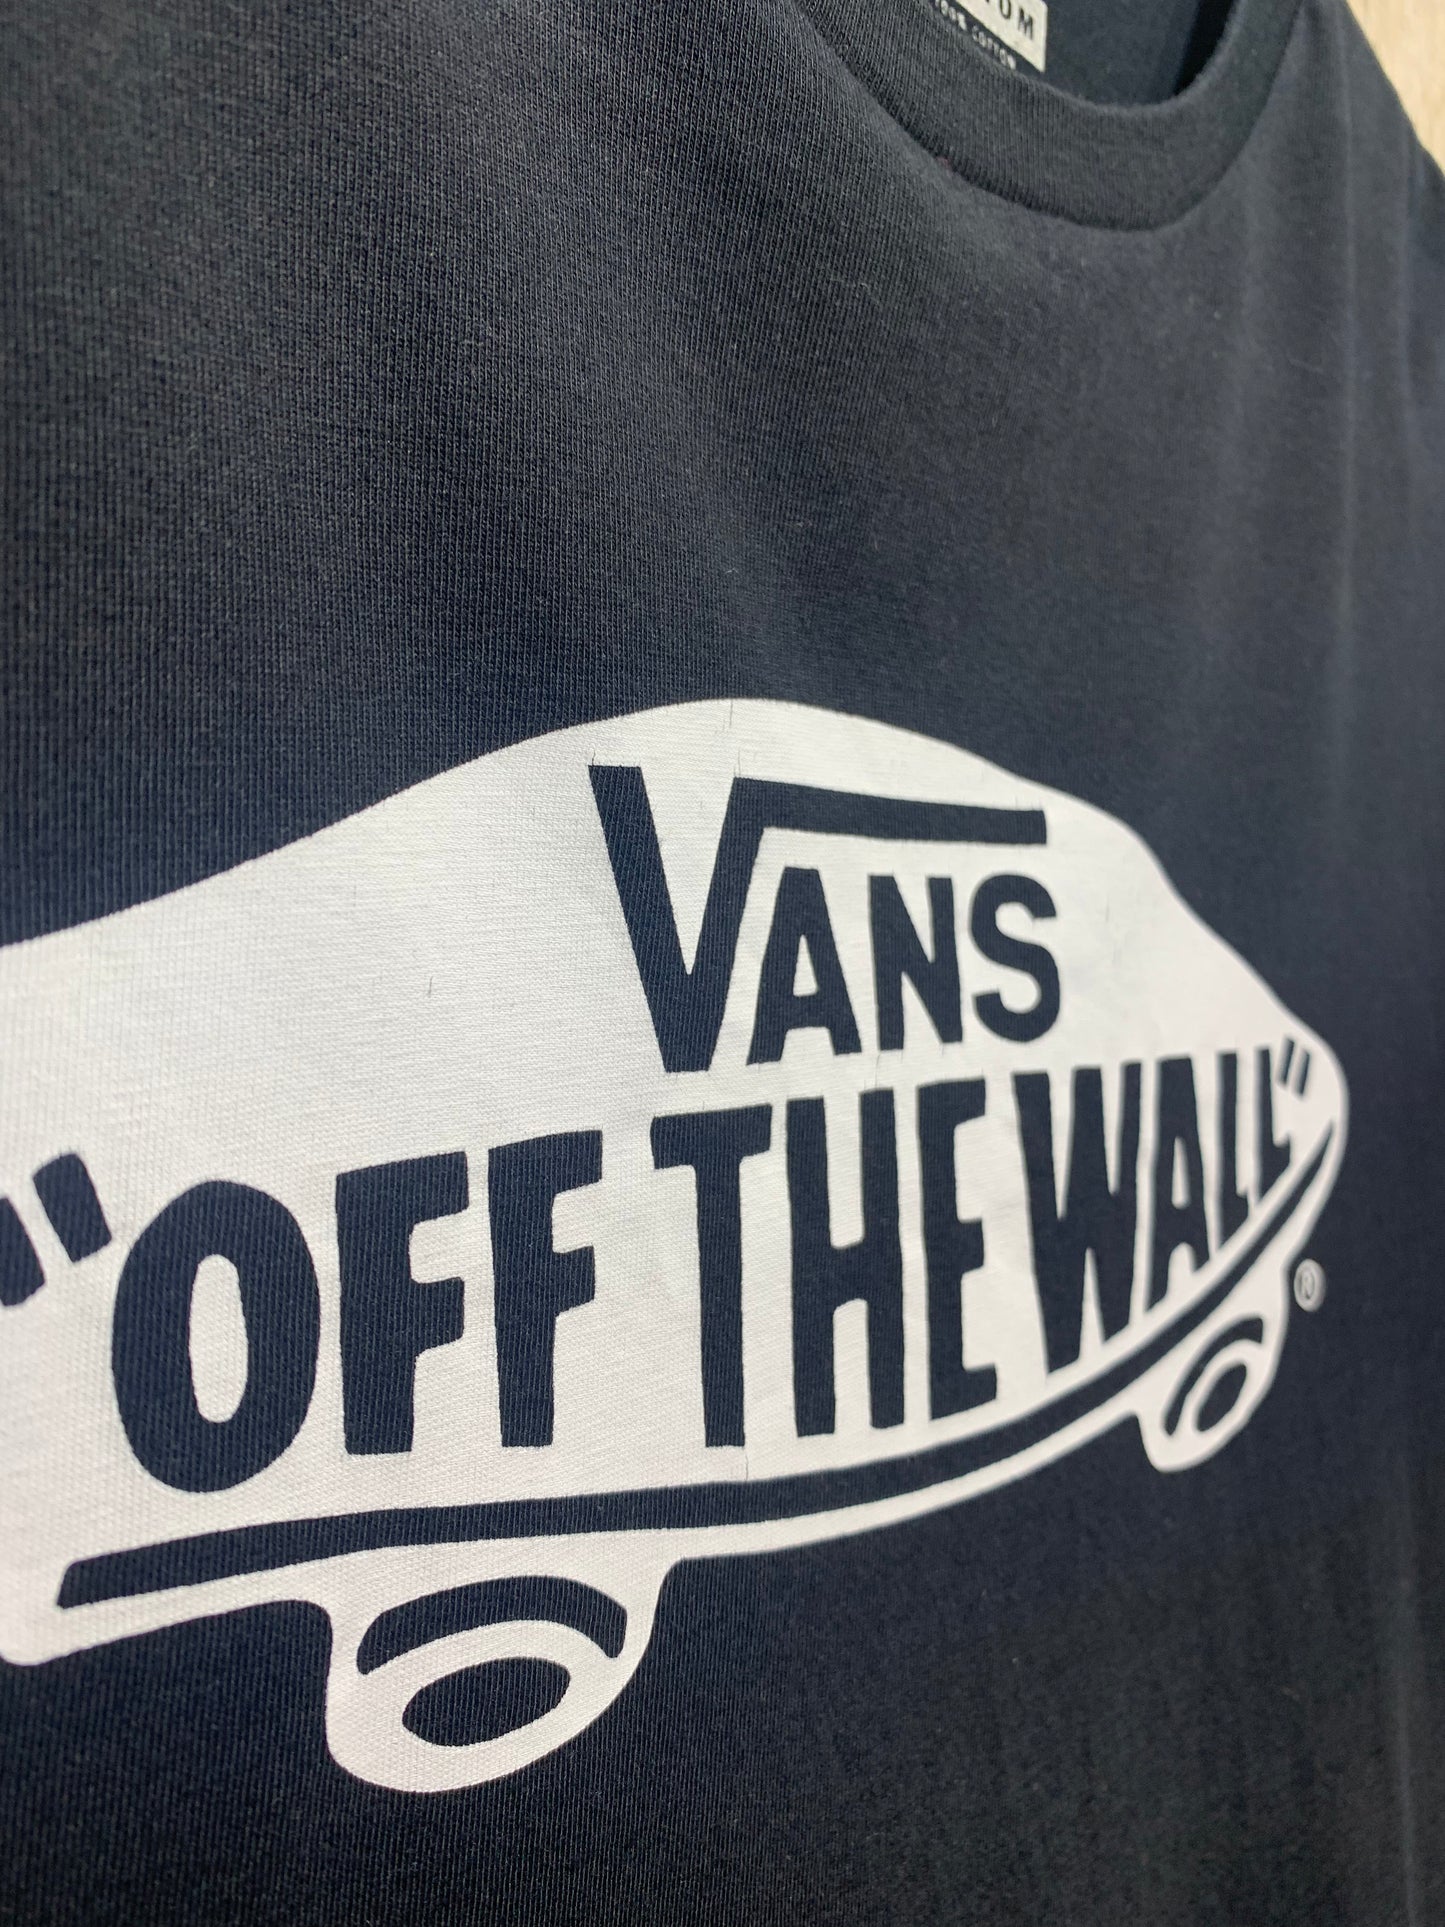 Black Vans “Off the Wall” Graphic Tee